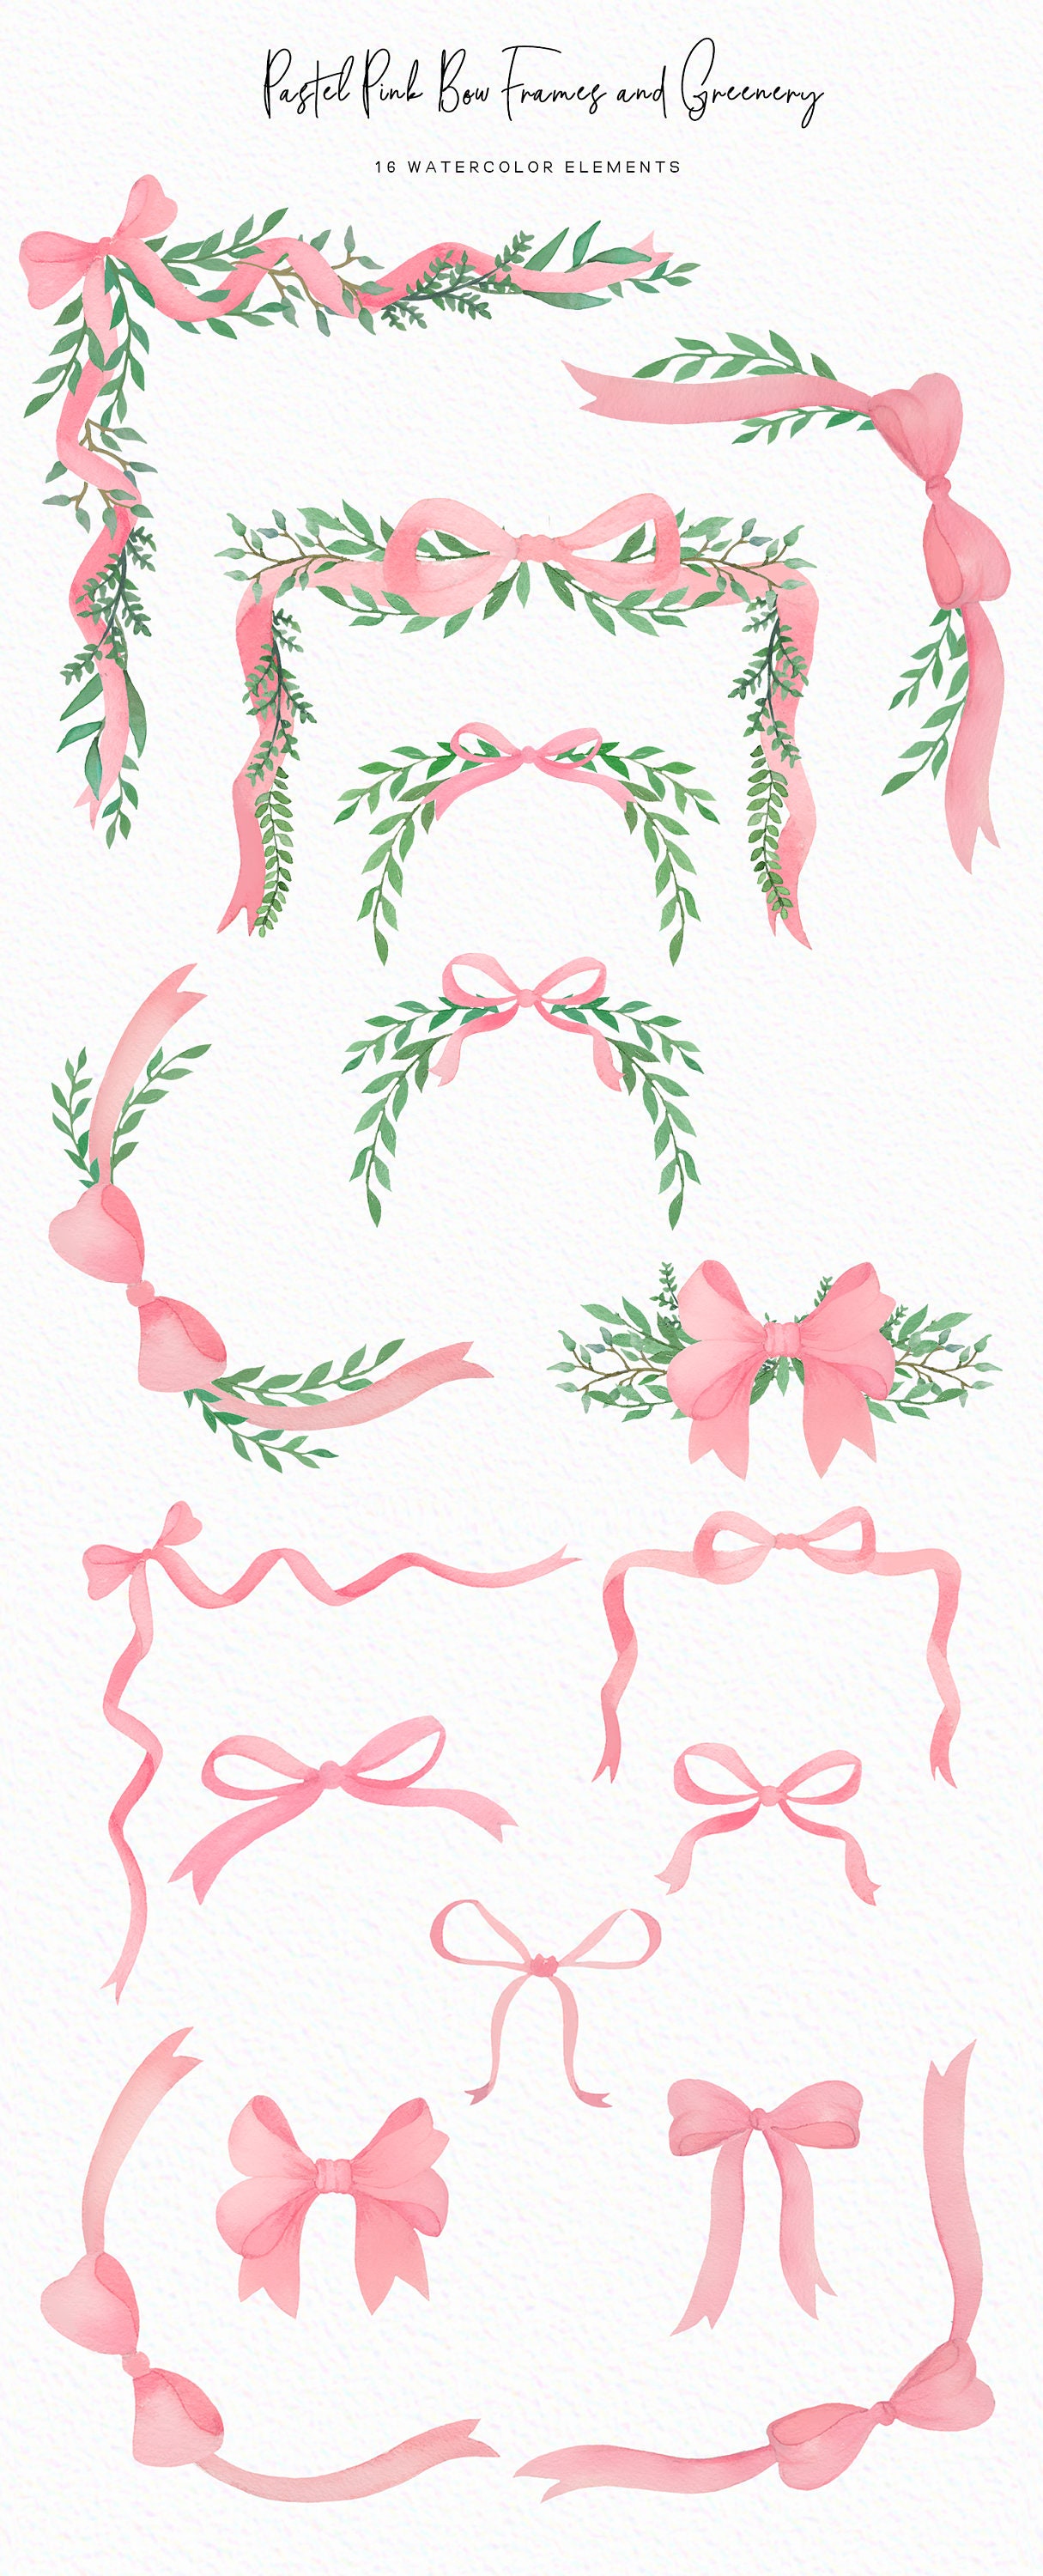 Watercolor Pastel Pink Bows Clipart PNG Pastel Ribbon Bow, Silk Bow, Bow  Frames Clipart, Girly Clipart, Cute Pink Bows commercial Use PNG 